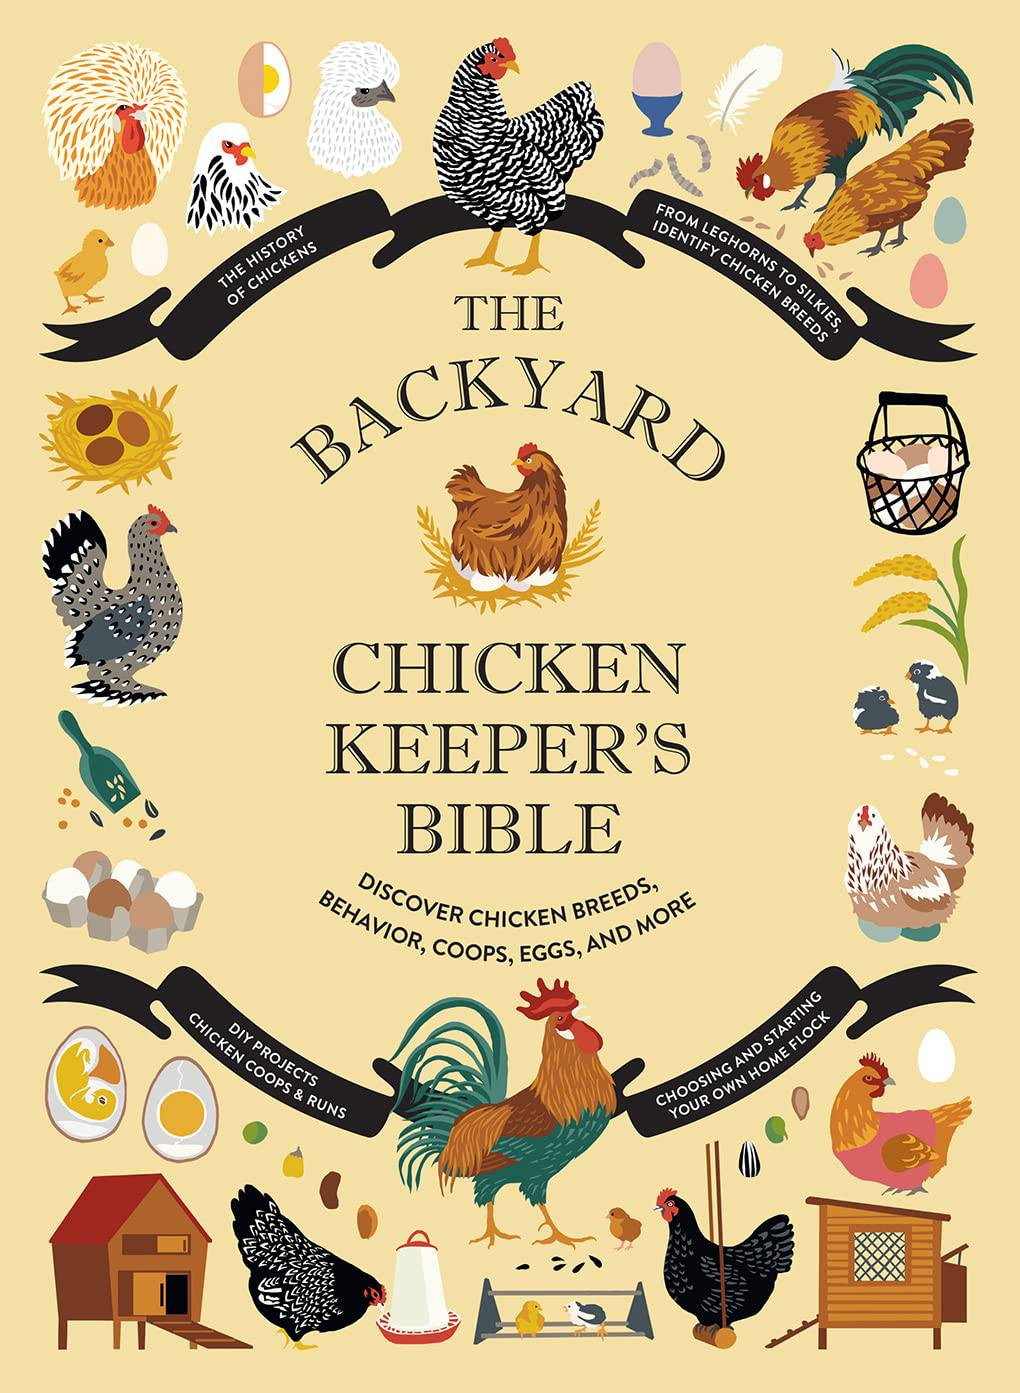 The Backyard Chicken Keeper's Bible: Discover Chicken Breeds, Behavior, Coops, Eggs, and More - Findlay Rowe Designs